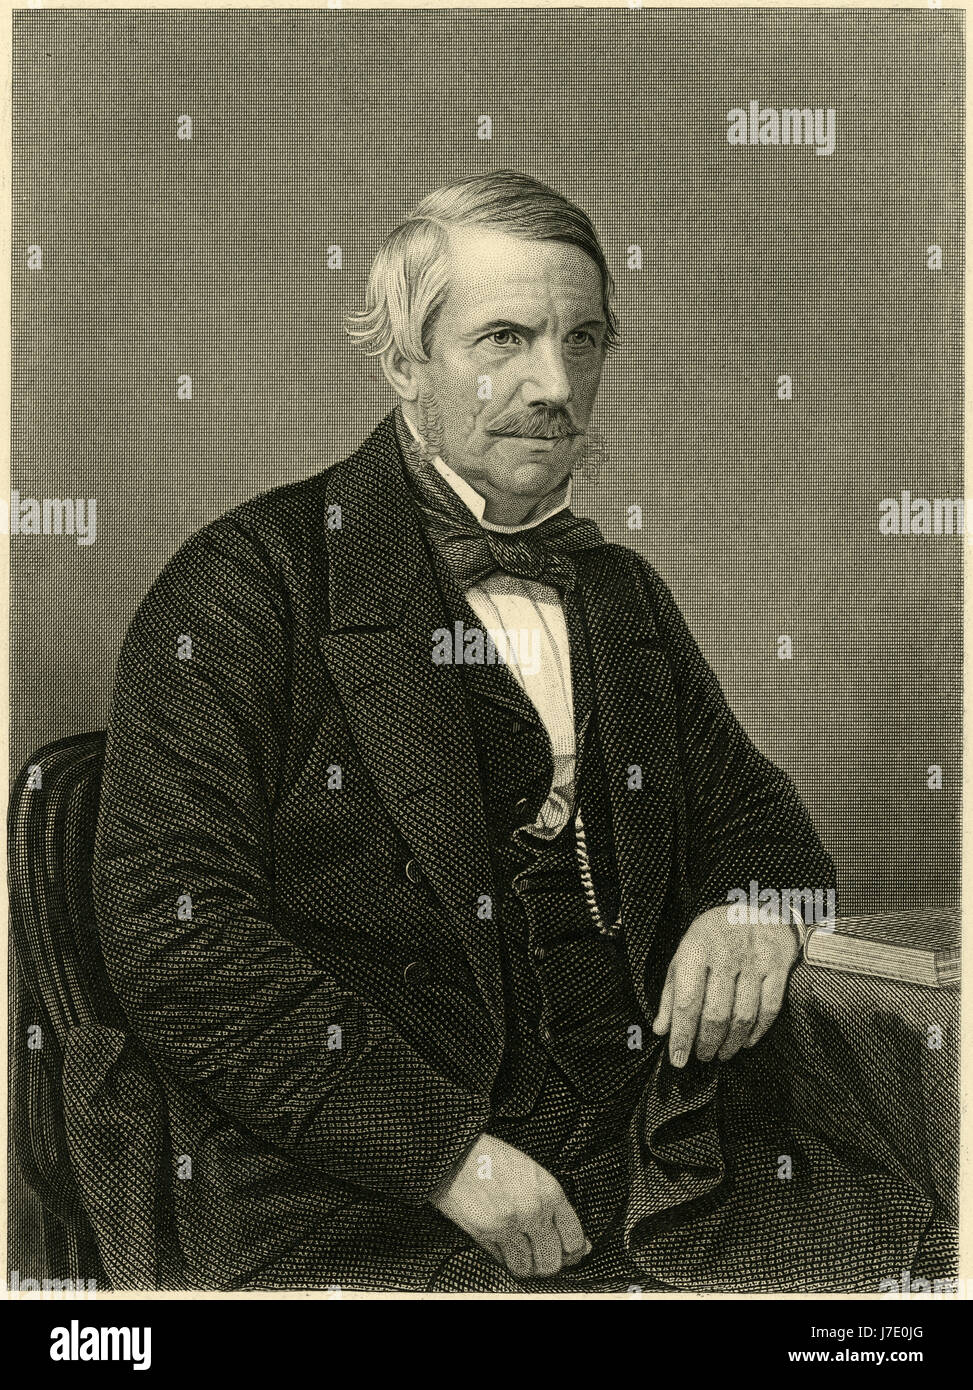 Antique c1870 engraving, John Lawrence, 1st Baron Lawrence. John Laird Mair Lawrence, 1st Baron Lawrence (1811-1879), was an Englishman who became a prominent British Imperial statesman who served as Viceroy of India from 1864 to 1869. SOURCE: ORIGINAL ENGRAVING. Stock Photo